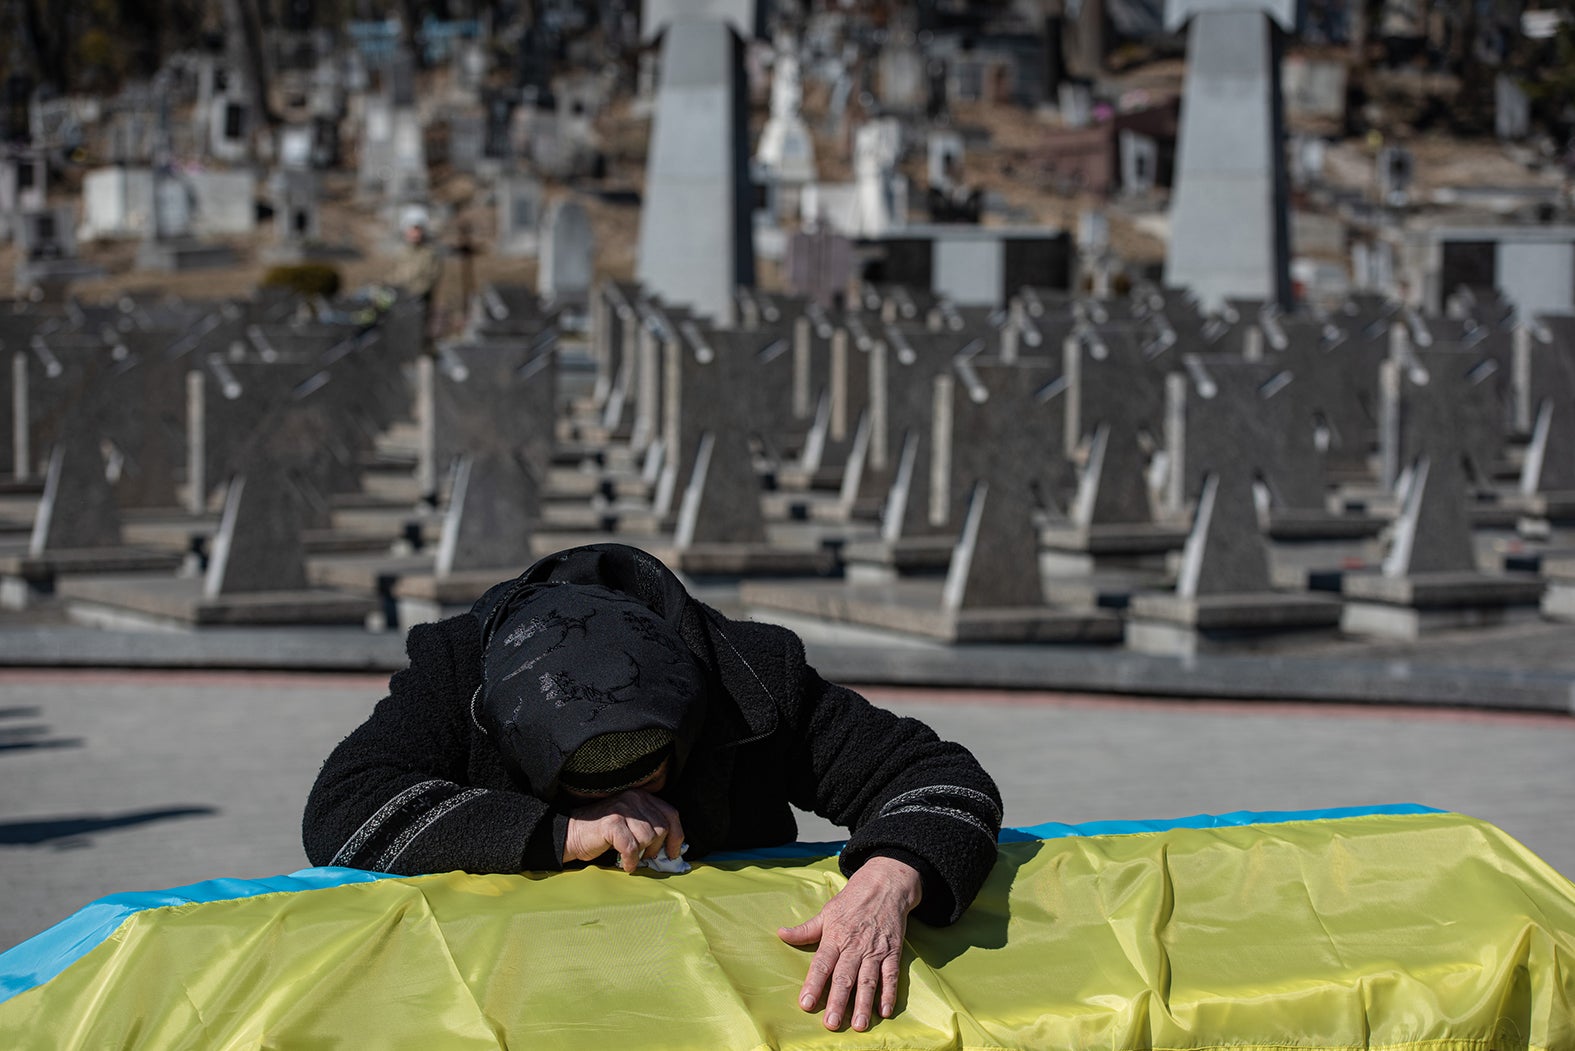 "Unity is hard to sustain when you're being bombed": Lindsey Hilsum's diary from Ukraine